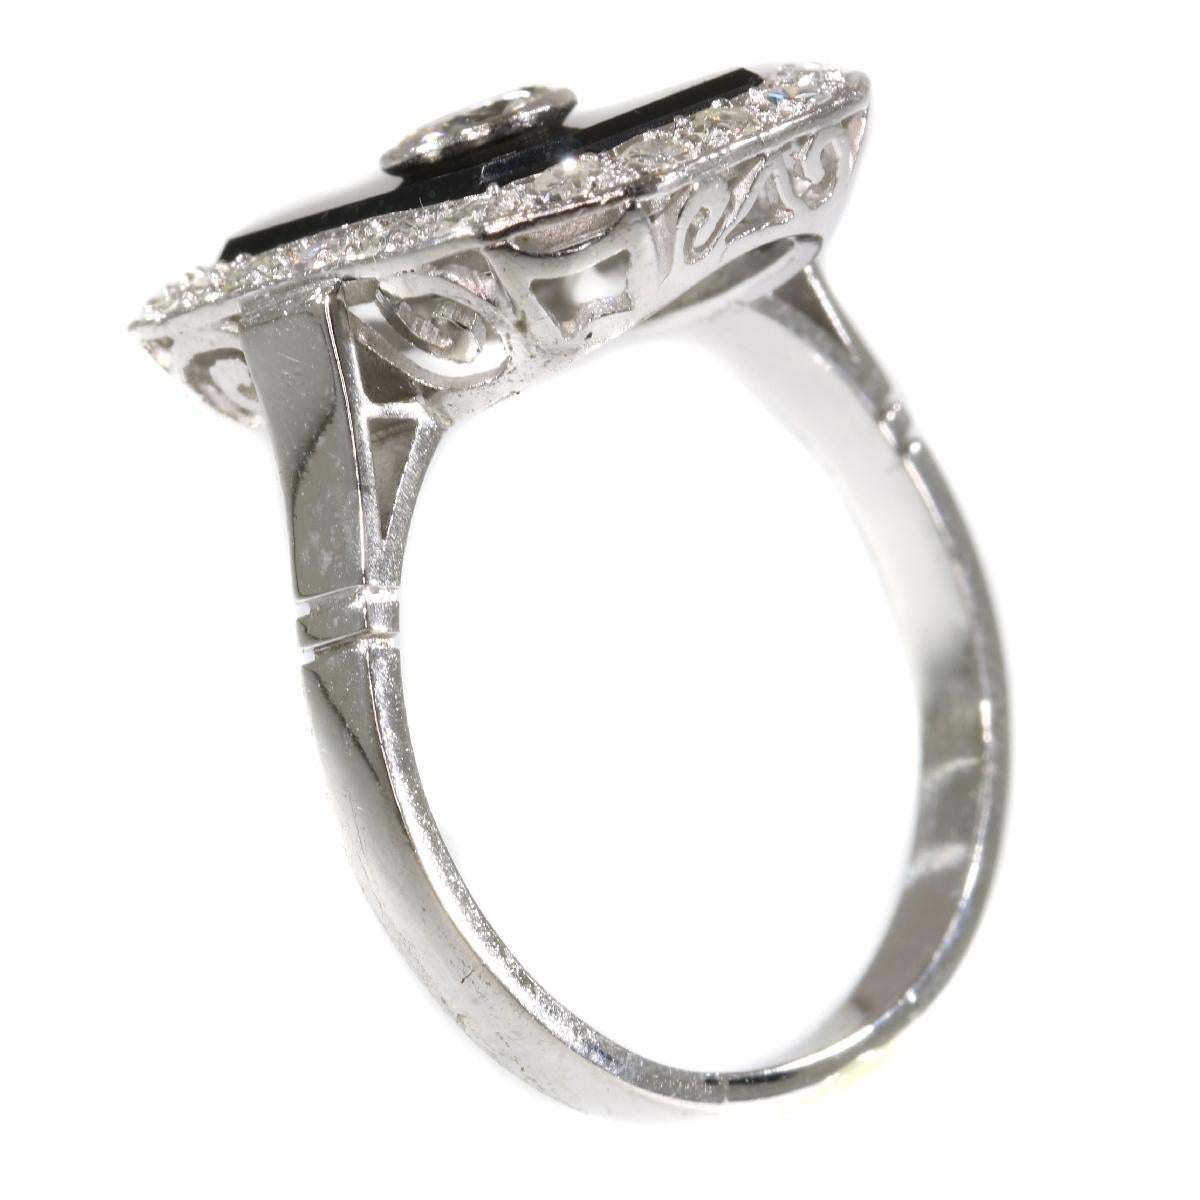 Round Cut Vintage Platinum Art Deco Style Diamond and Onyx Ring from the 1950s